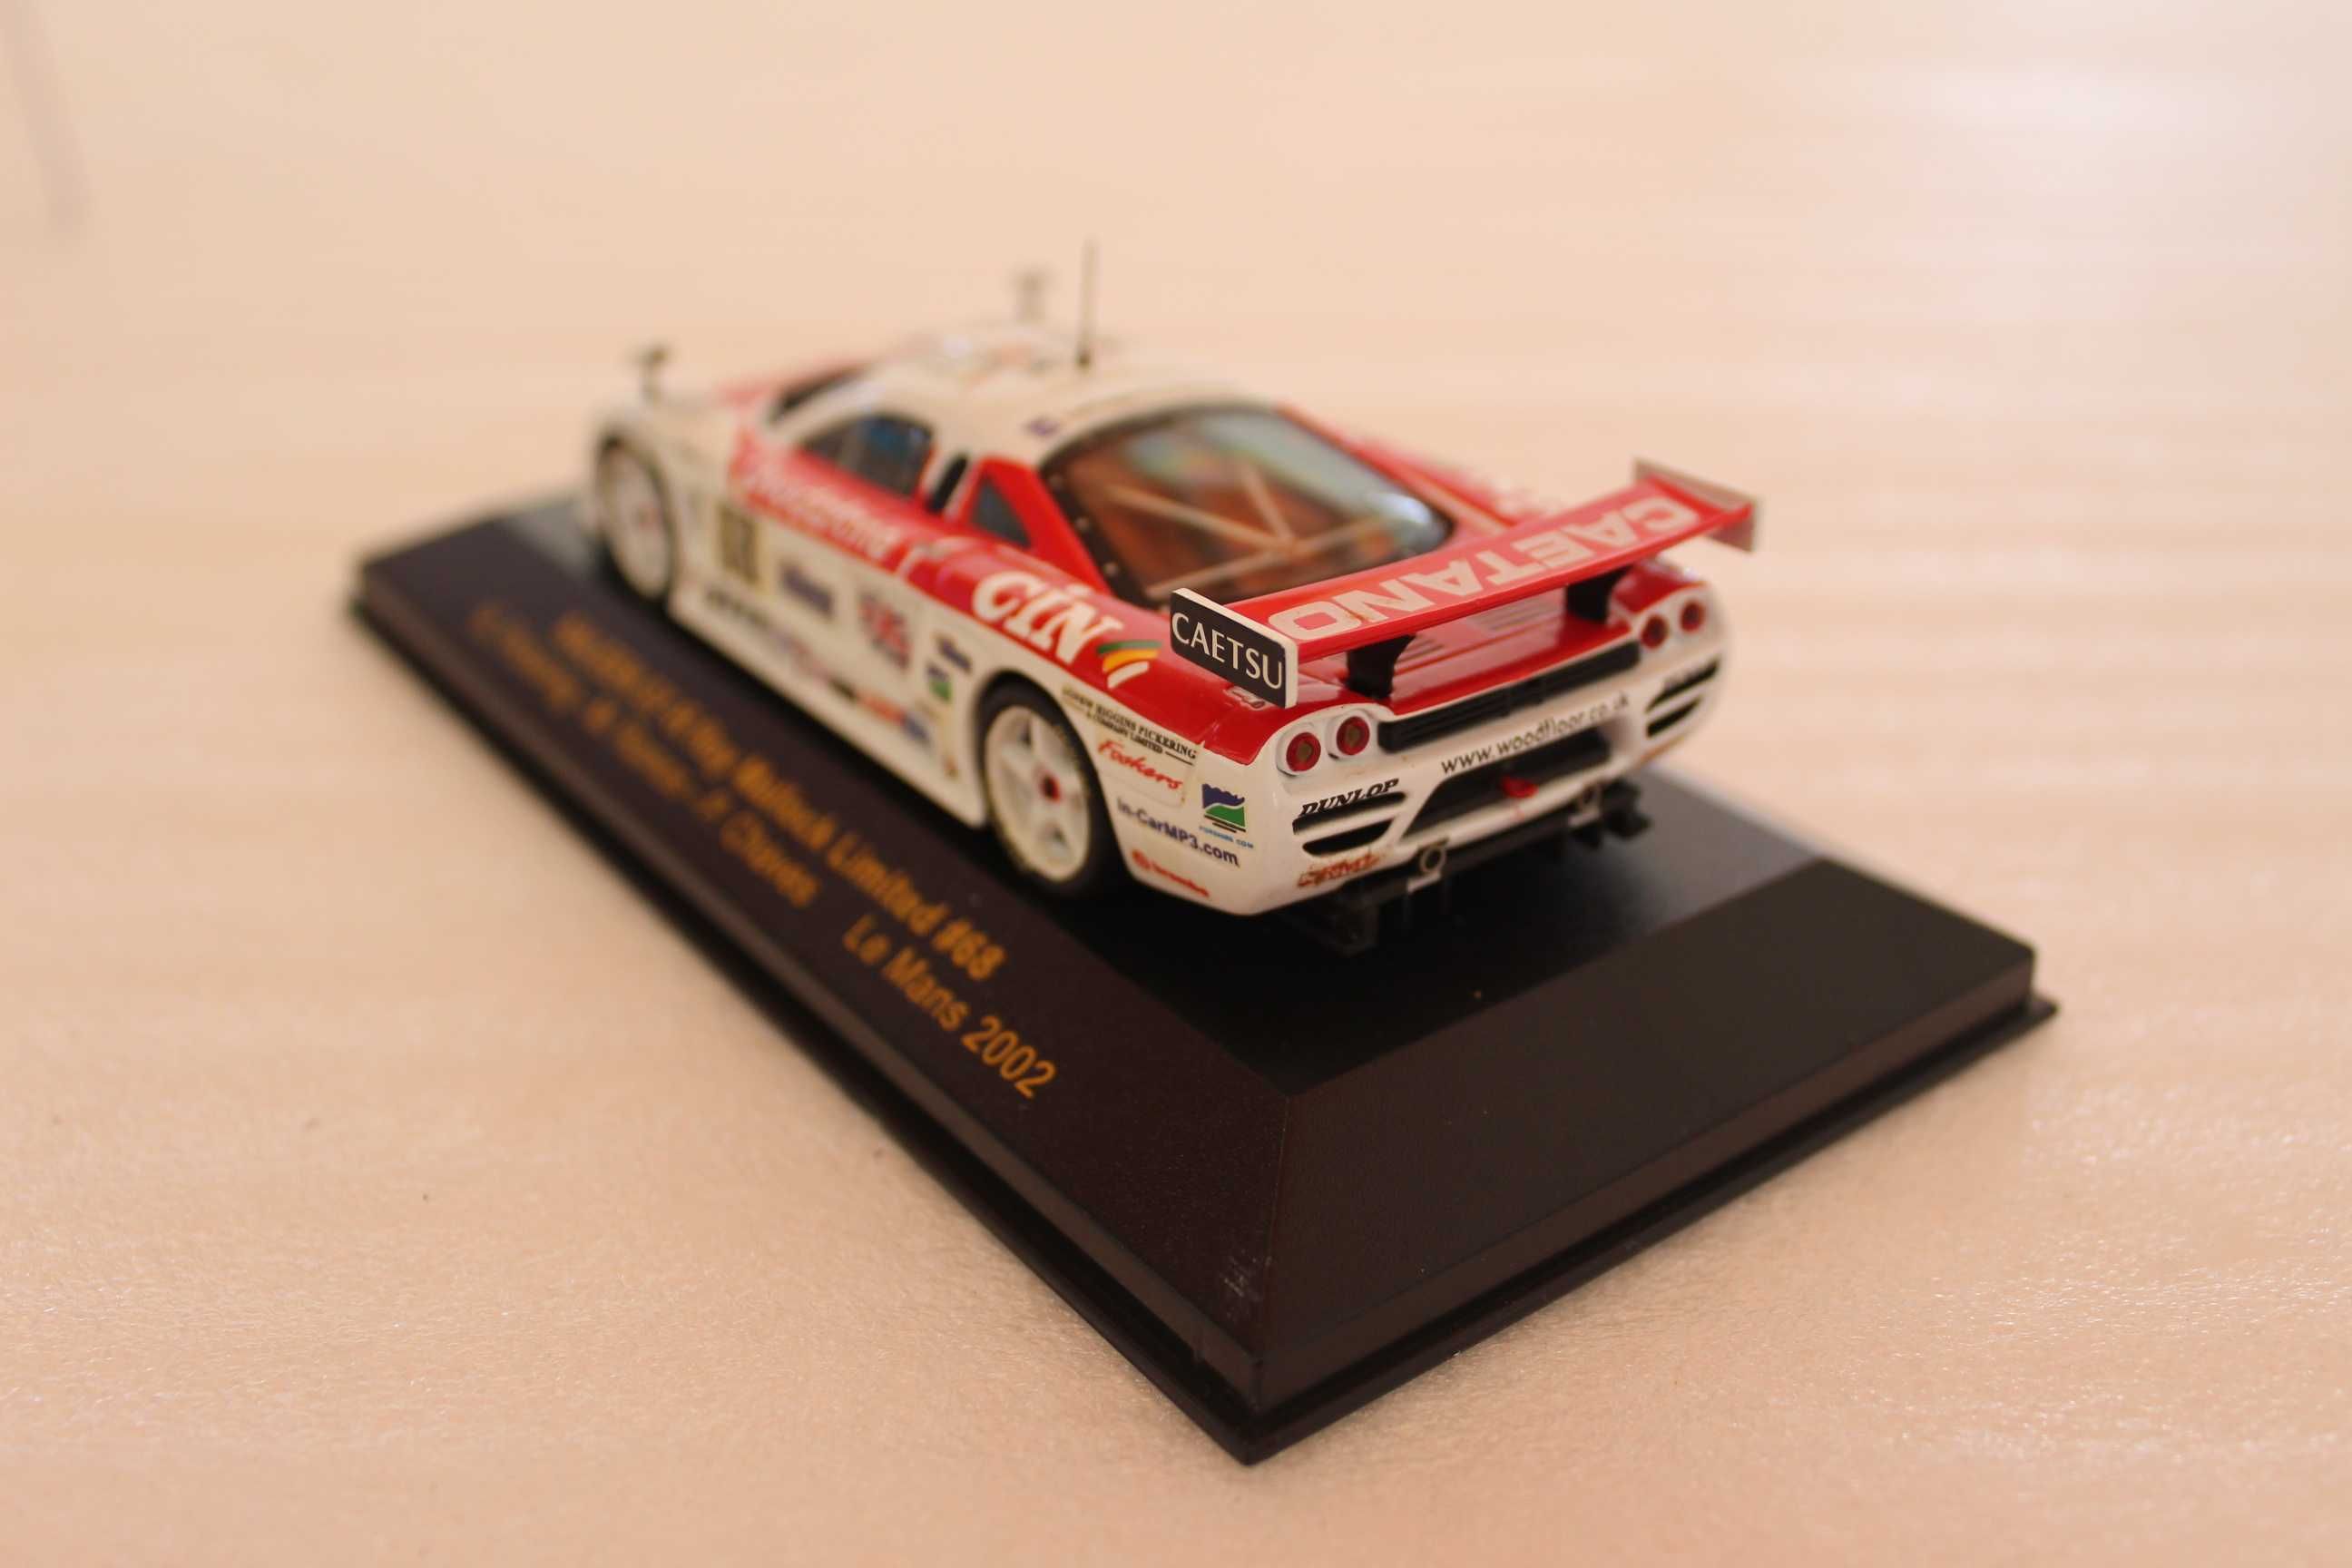 Miniatura 1/43 Saleen S7-R  Le Mans 2002 Pedro Chaves/ Miguel Ramos